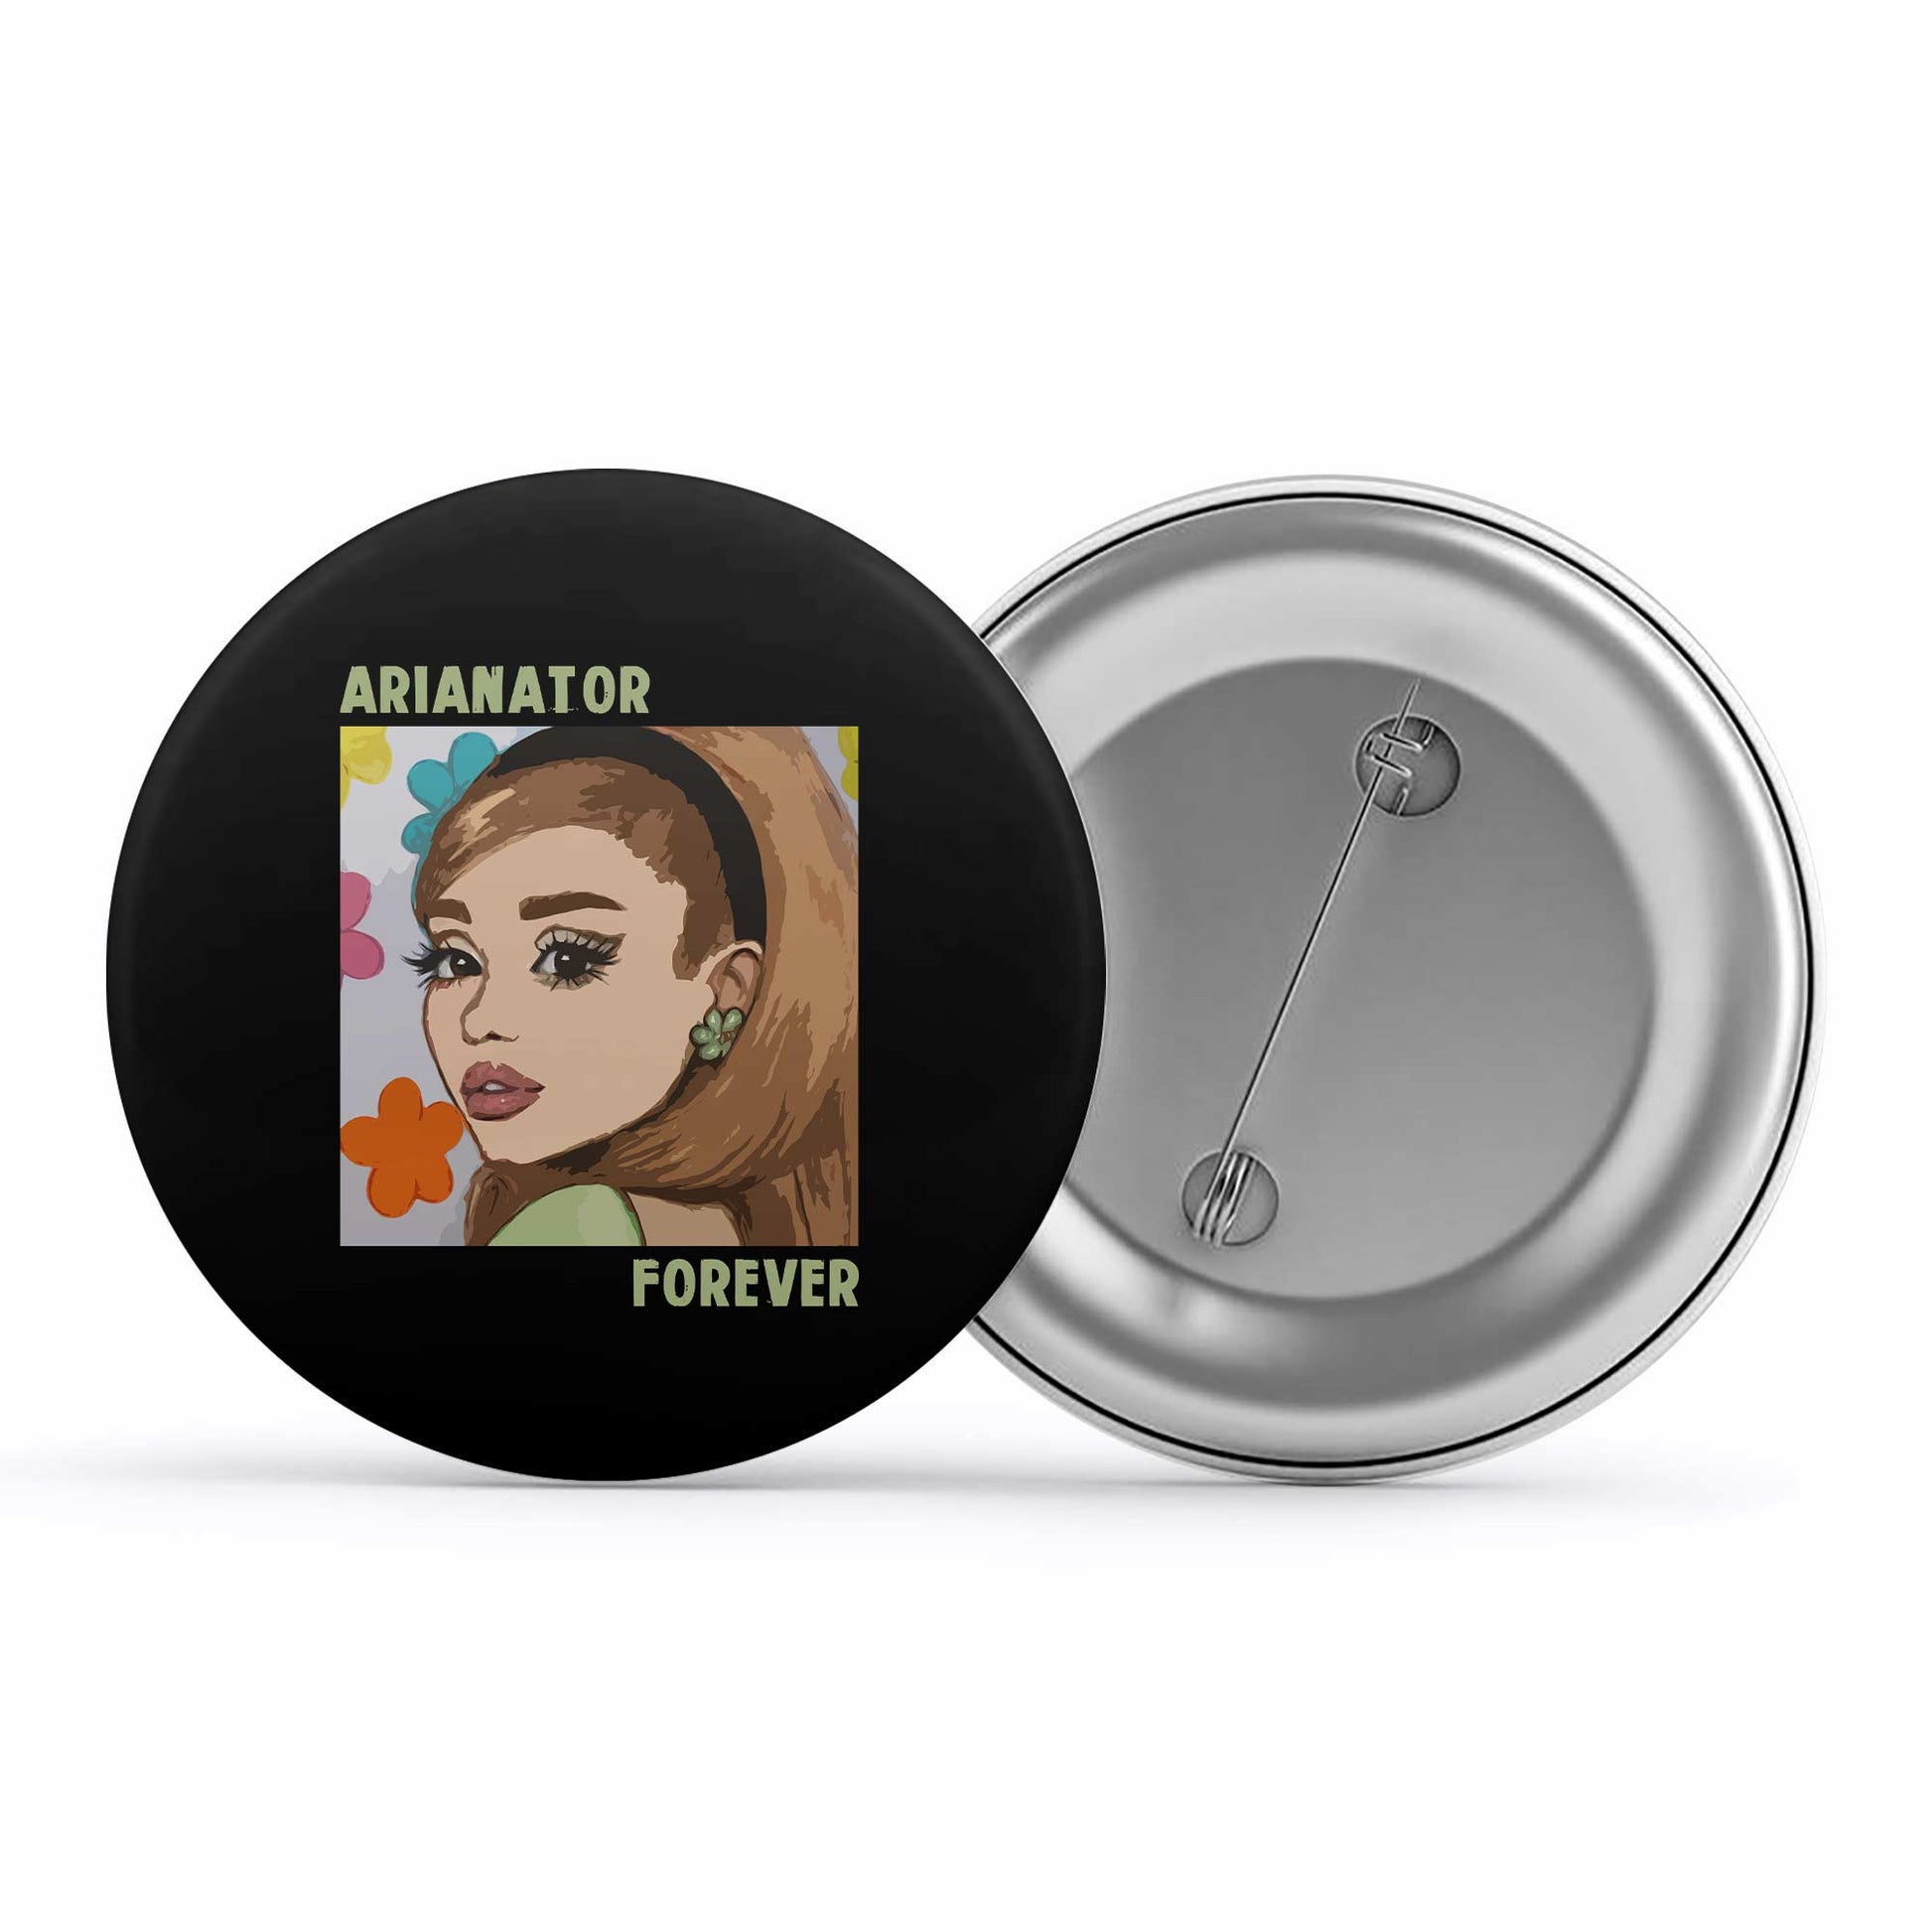 ariana grande arianator forever badge pin button music band buy online united states of america usa the banyan tee tbt men women girls boys unisex  